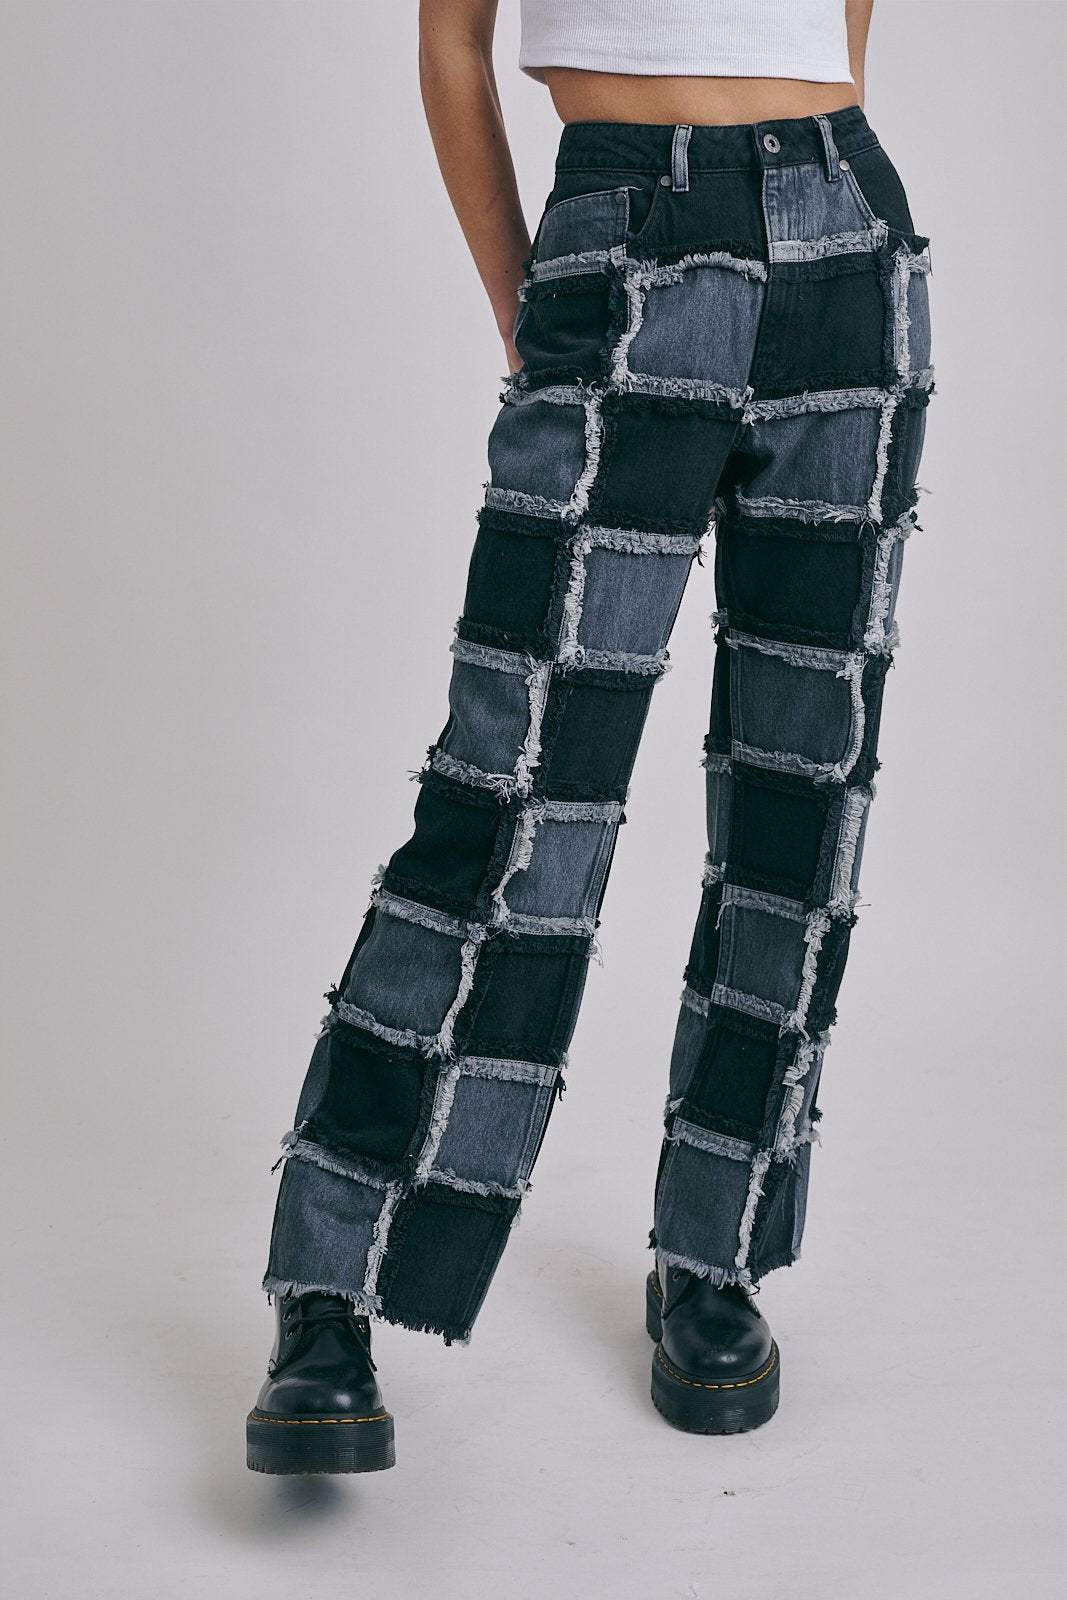 MUSE DENIM - CHARCOAL - EXCLUSIVE Denim from THE RAGGED PRIEST - Just $66.00! SHOP NOW AT IAMINHATELOVE BOTH IN STORE FOR CYPRUS AND ONLINE WORLDWIDE